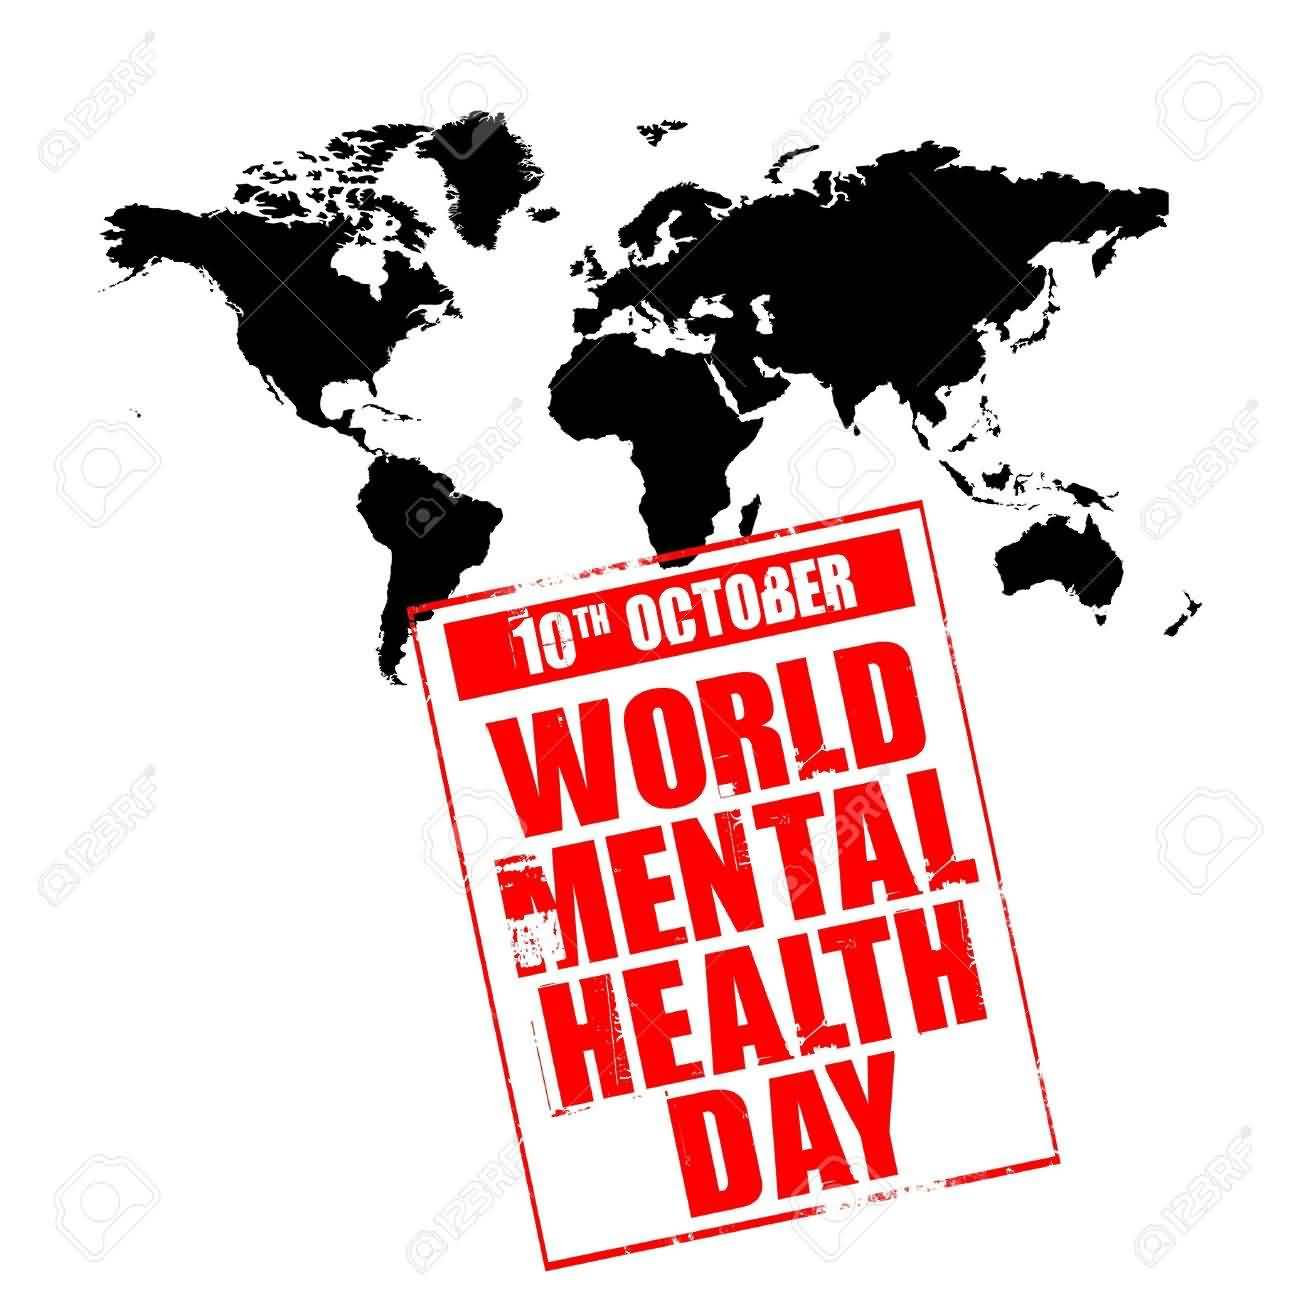 10th October World Mental Health Day World Map